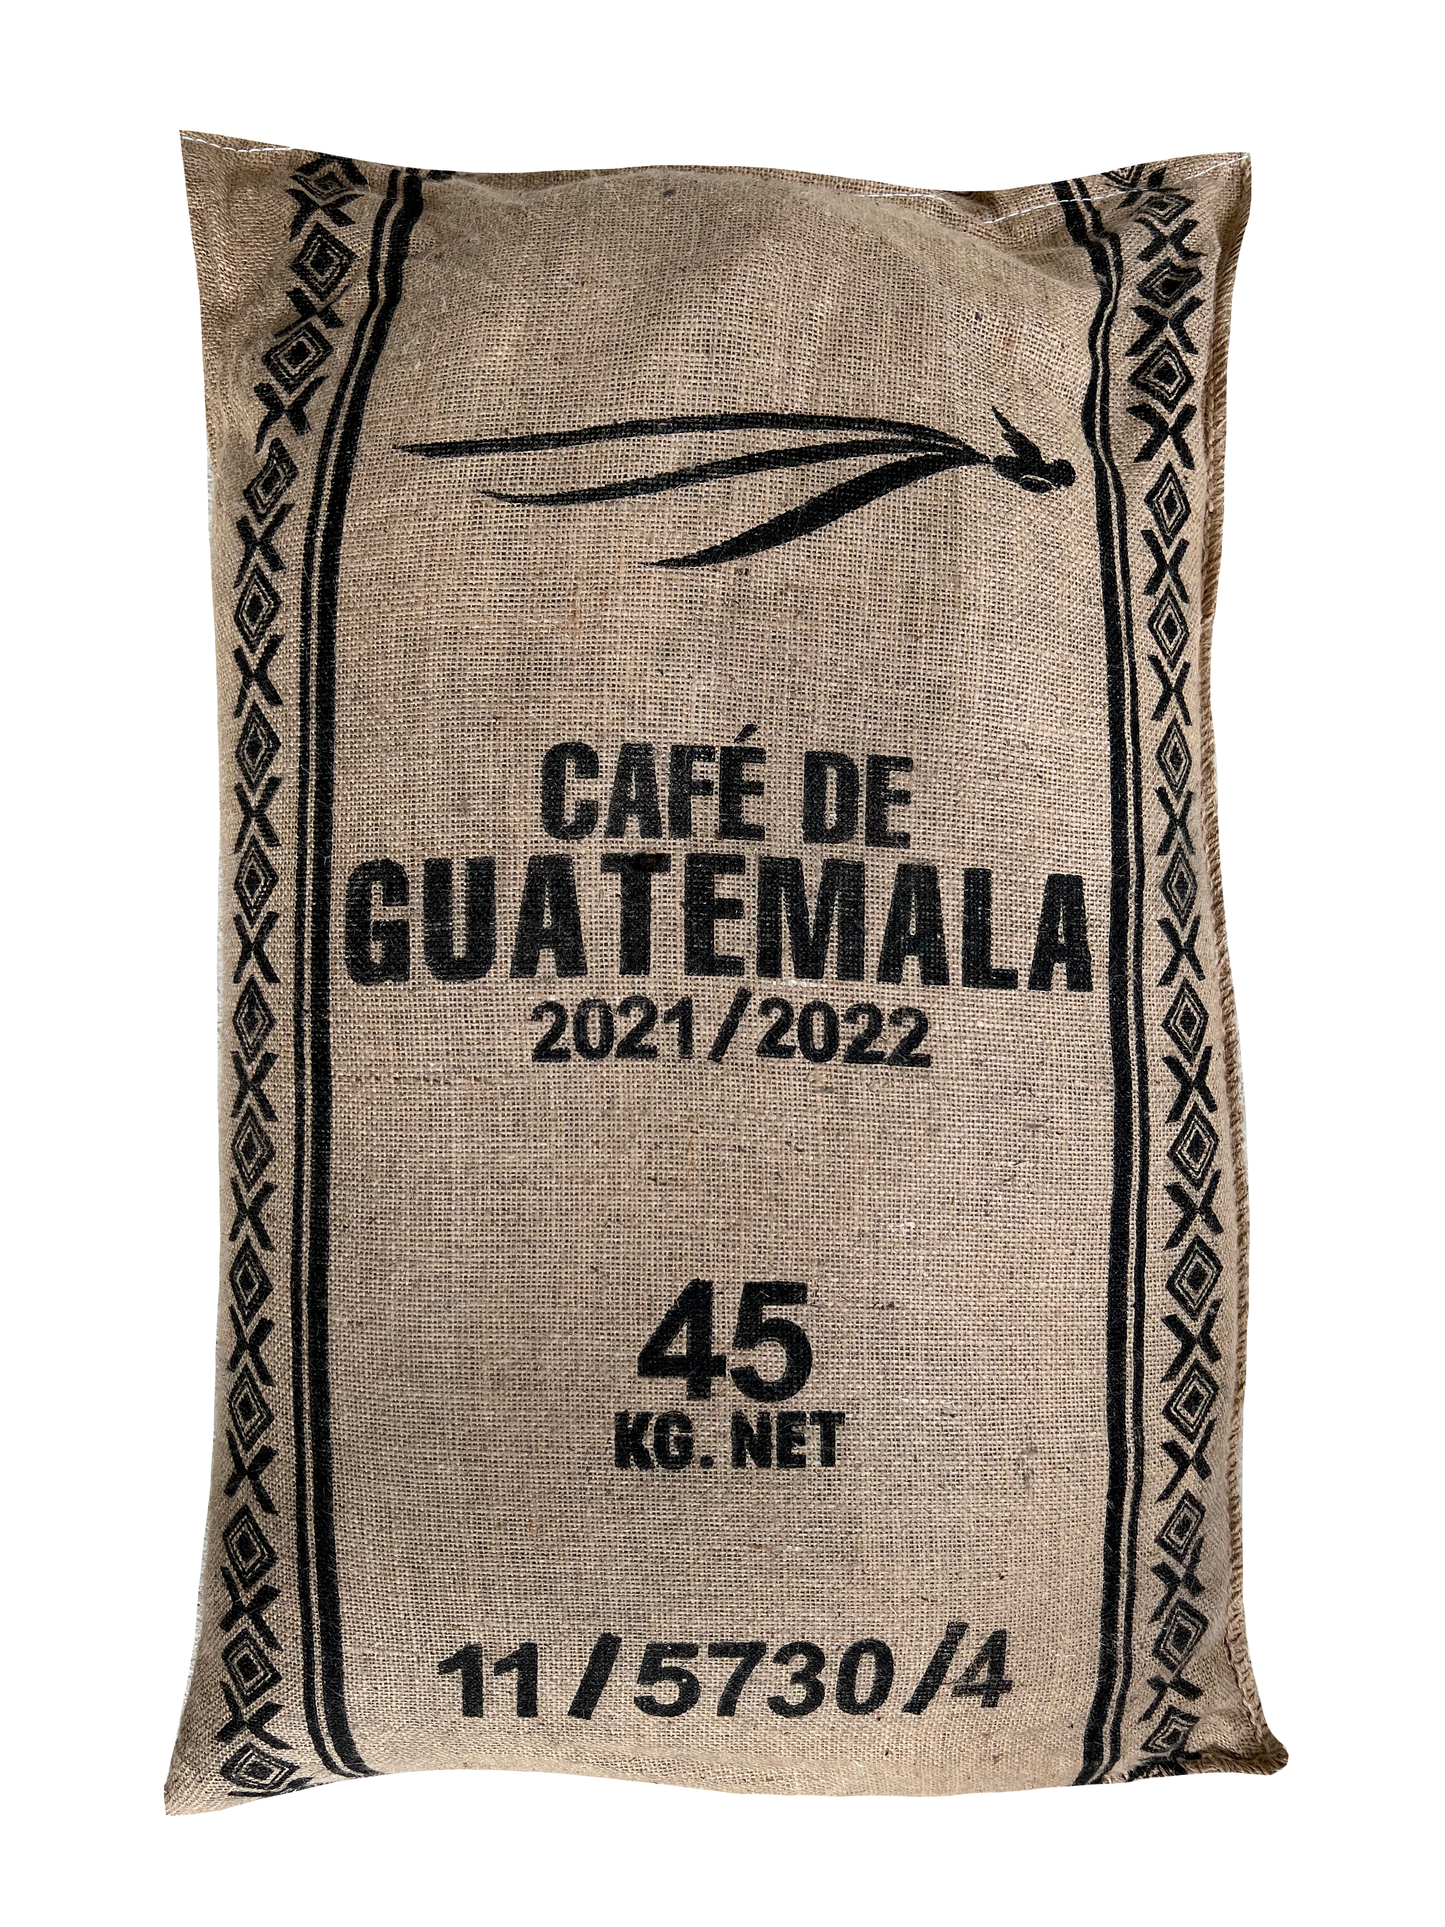 Guatemala HB Specialty Kafetos arabica unroasted – Green coffee beans